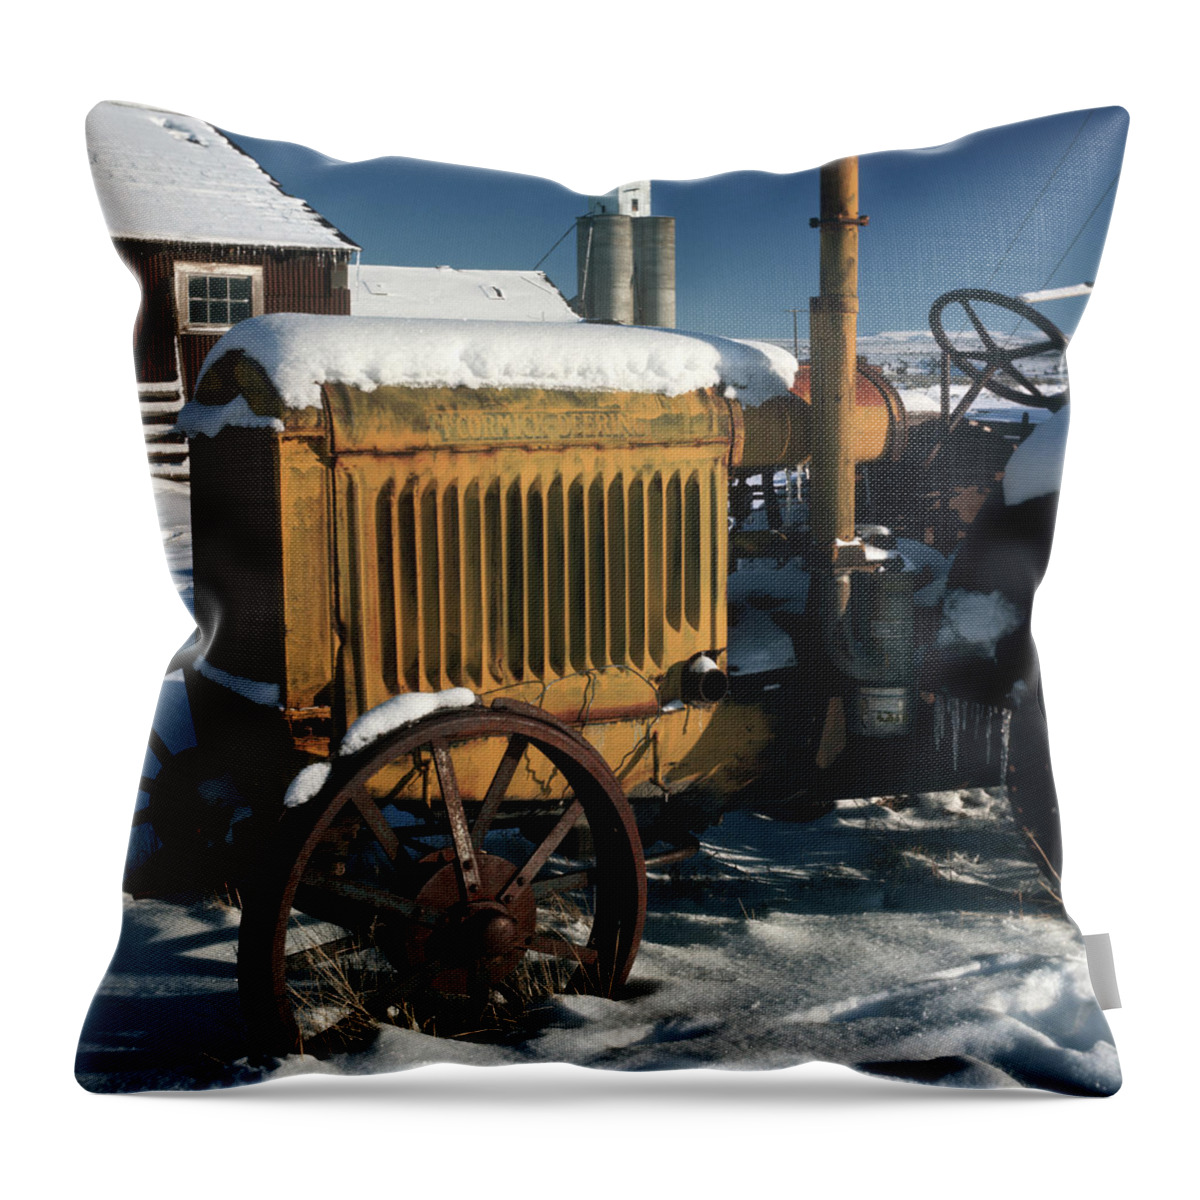 Photography Throw Pillow featuring the photograph Old Mccormick Deering Tractor Sitting by Vintage Images